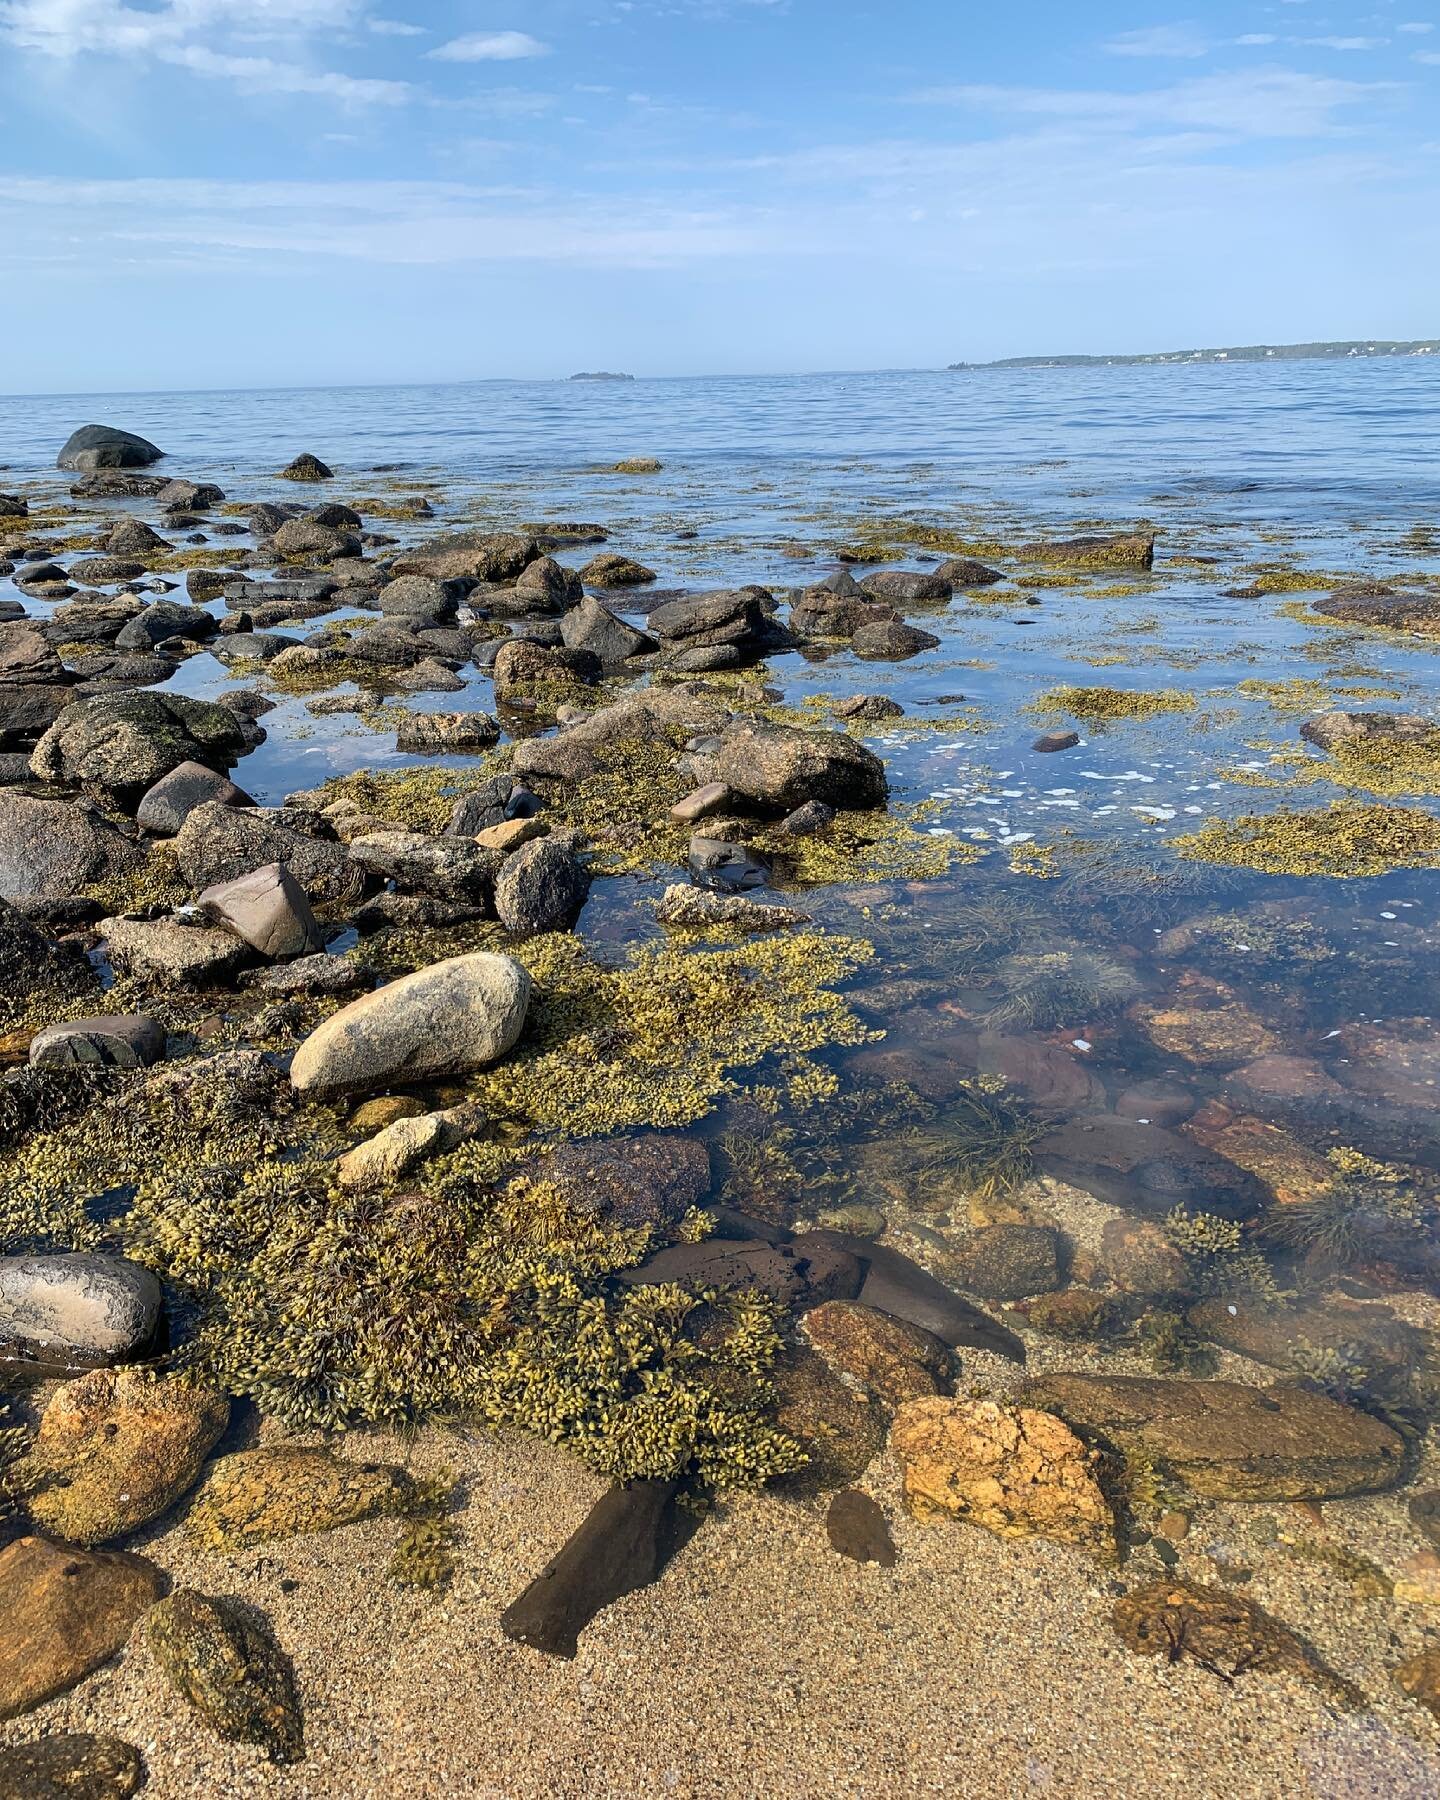 Maine photo dump: rocks, rocks and more rocks, ft. photos with Spencer AND by Spencer!